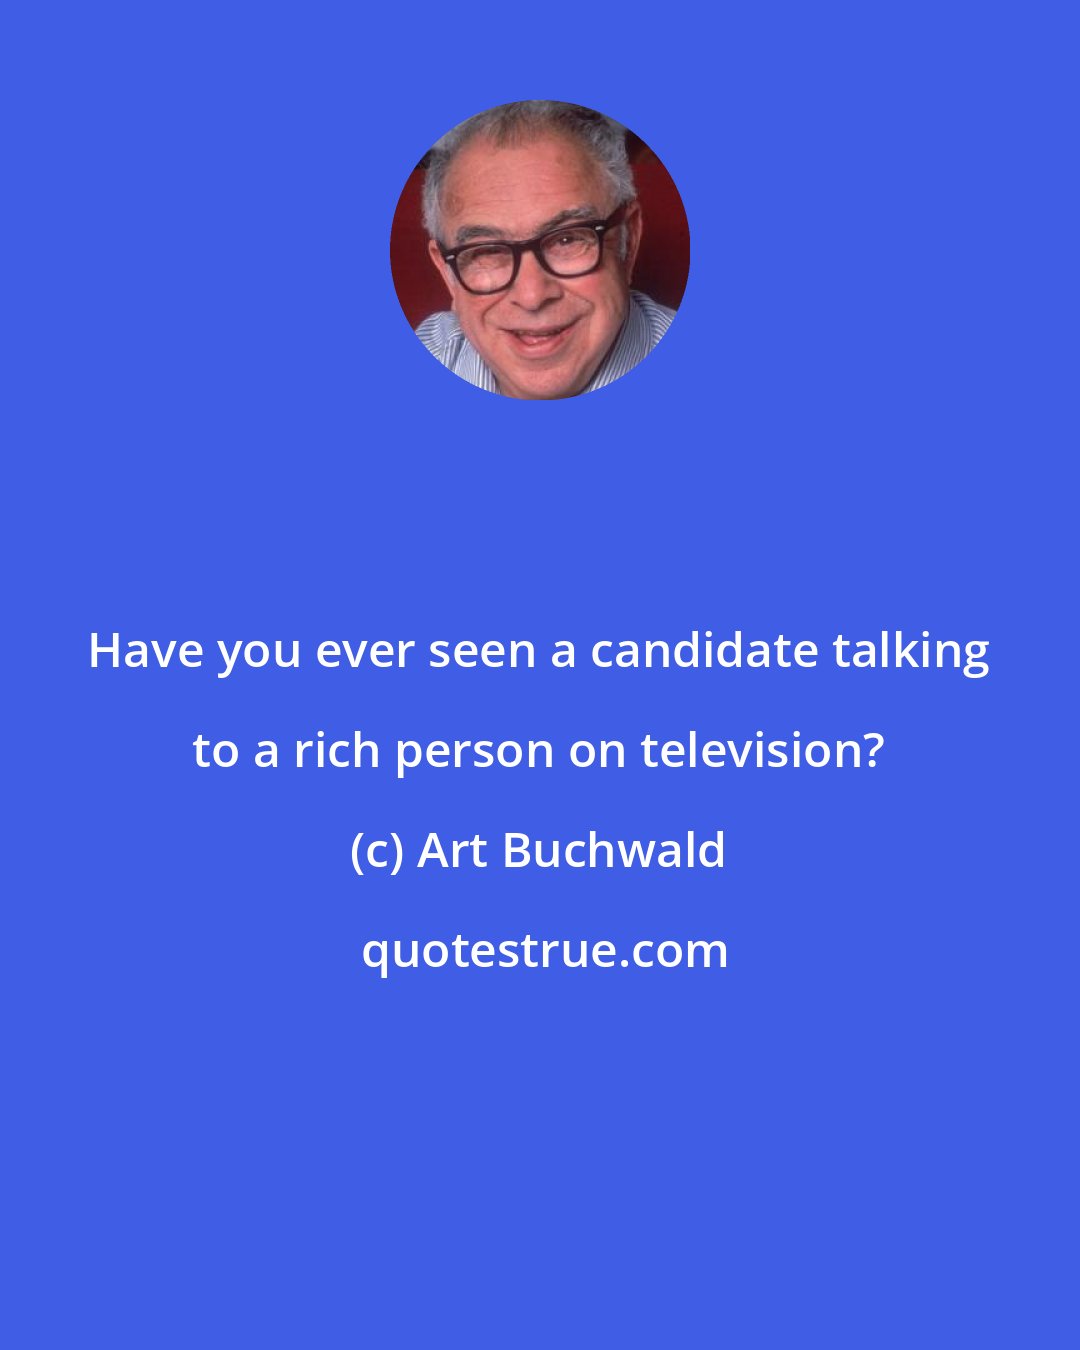 Art Buchwald: Have you ever seen a candidate talking to a rich person on television?